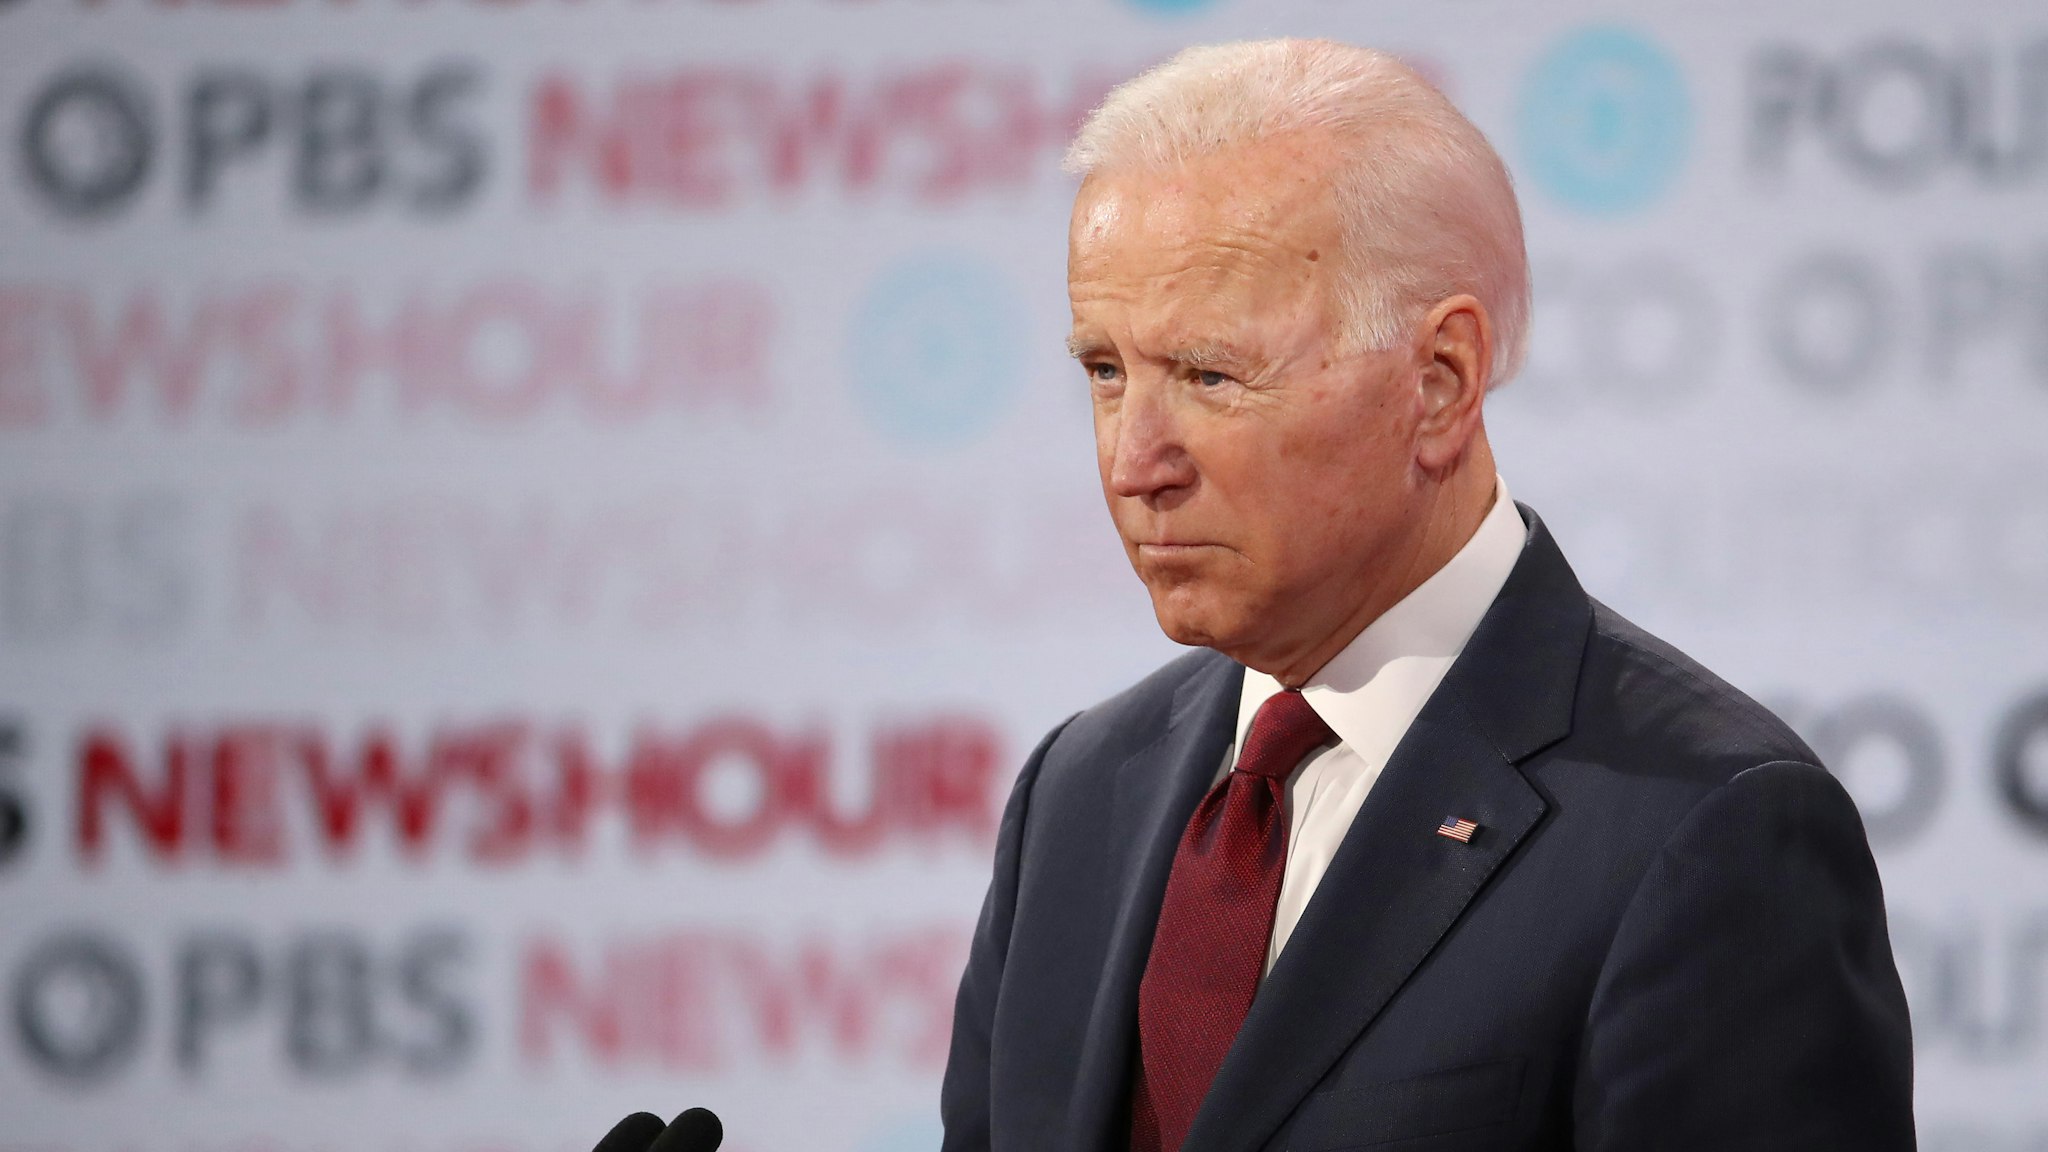 LOS ANGELES, CALIFORNIA - DECEMBER 19: Former Vice President Joe Biden listens during the Democratic presidential primary debate at Loyola Marymount University on December 19, 2019 in Los Angeles, California. Seven candidates out of the crowded field qualified for the 6th and last Democratic presidential primary debate of 2019 hosted by PBS NewsHour and Politico.